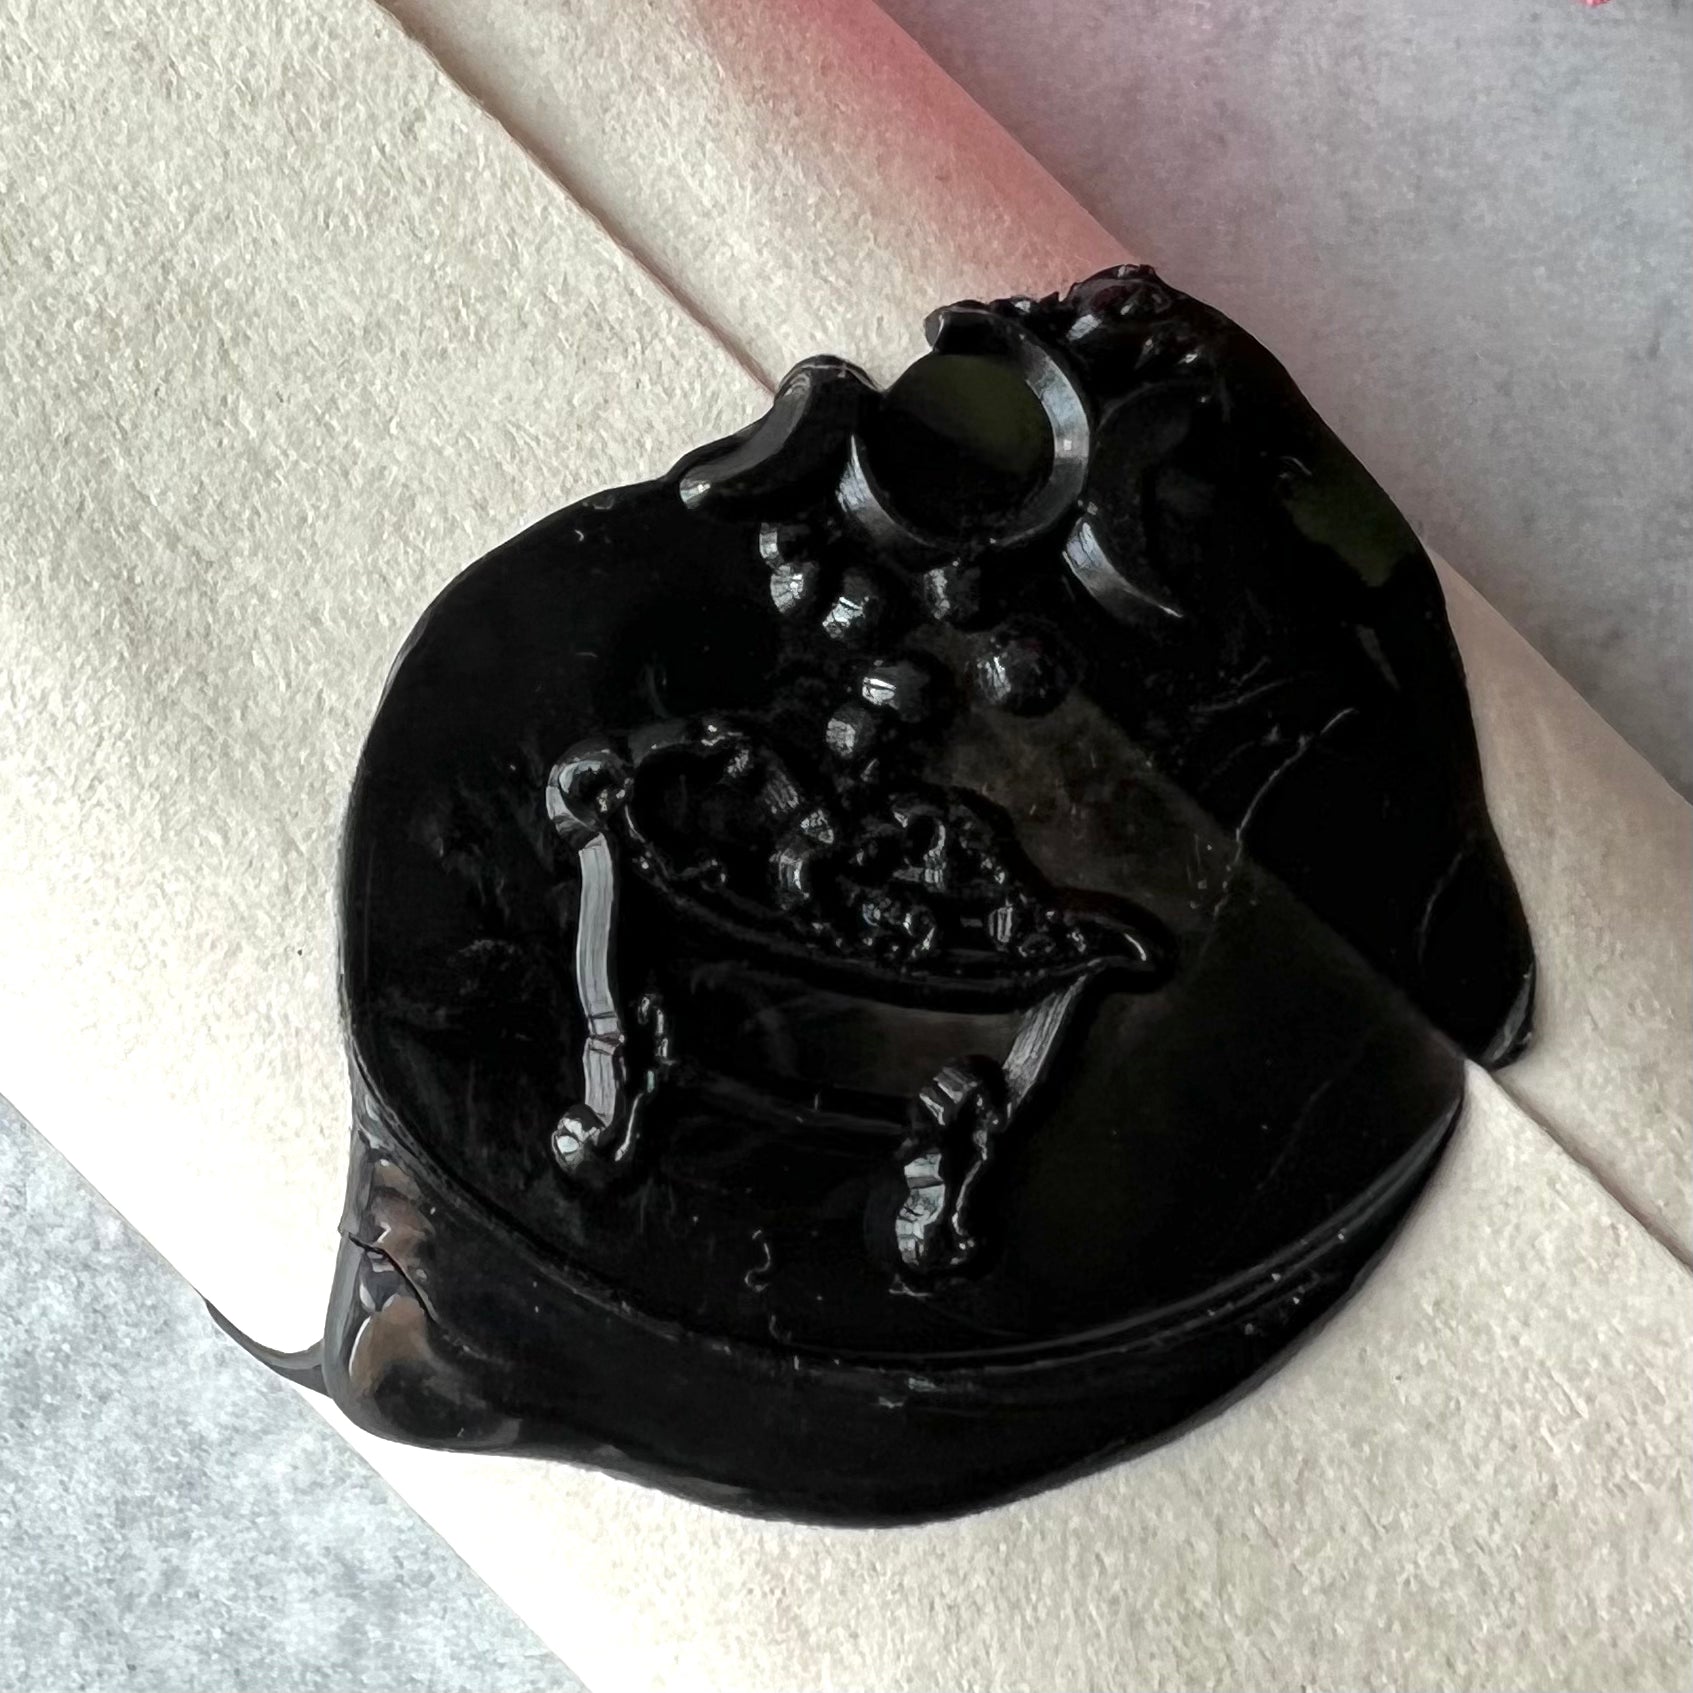 A close up of the black wax seal of the taper candles' label